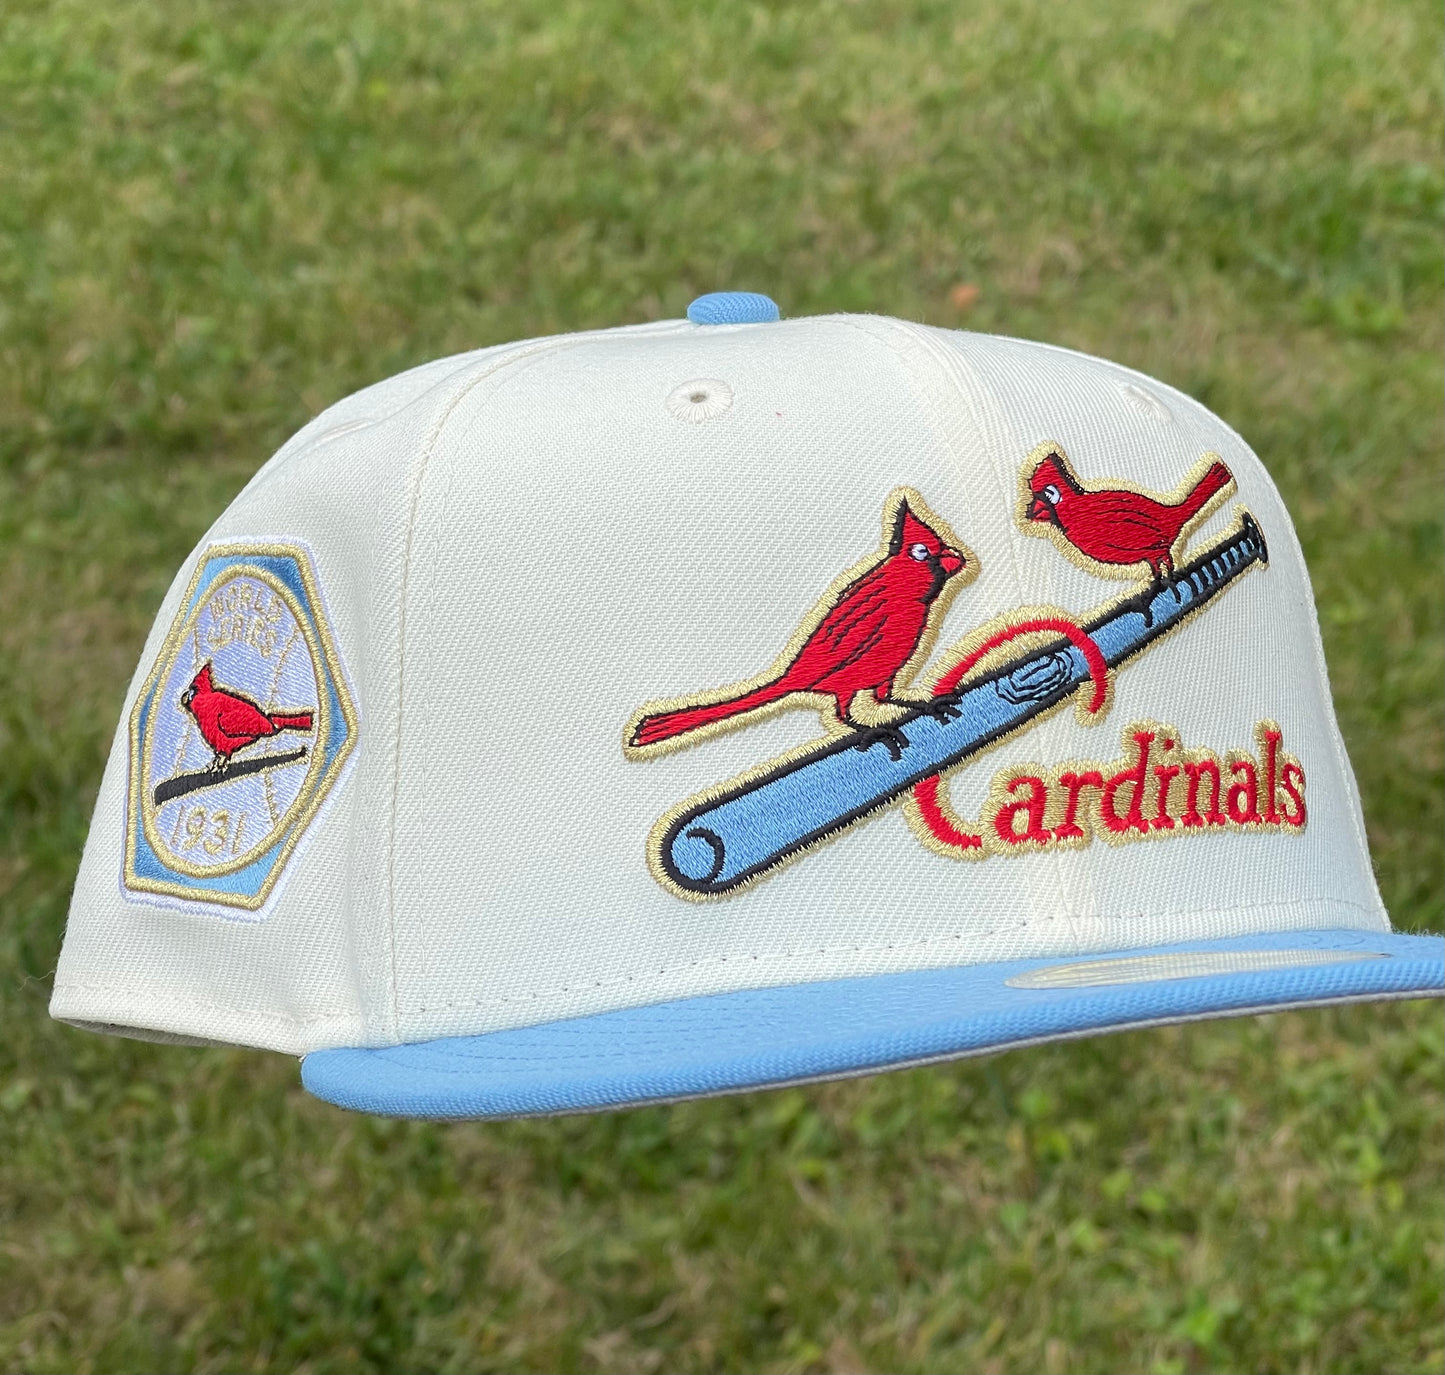 St. Louis Cardinals 1931 World Series Patch Fitted Hat (Off White/Sky Blue) 5950 New Era